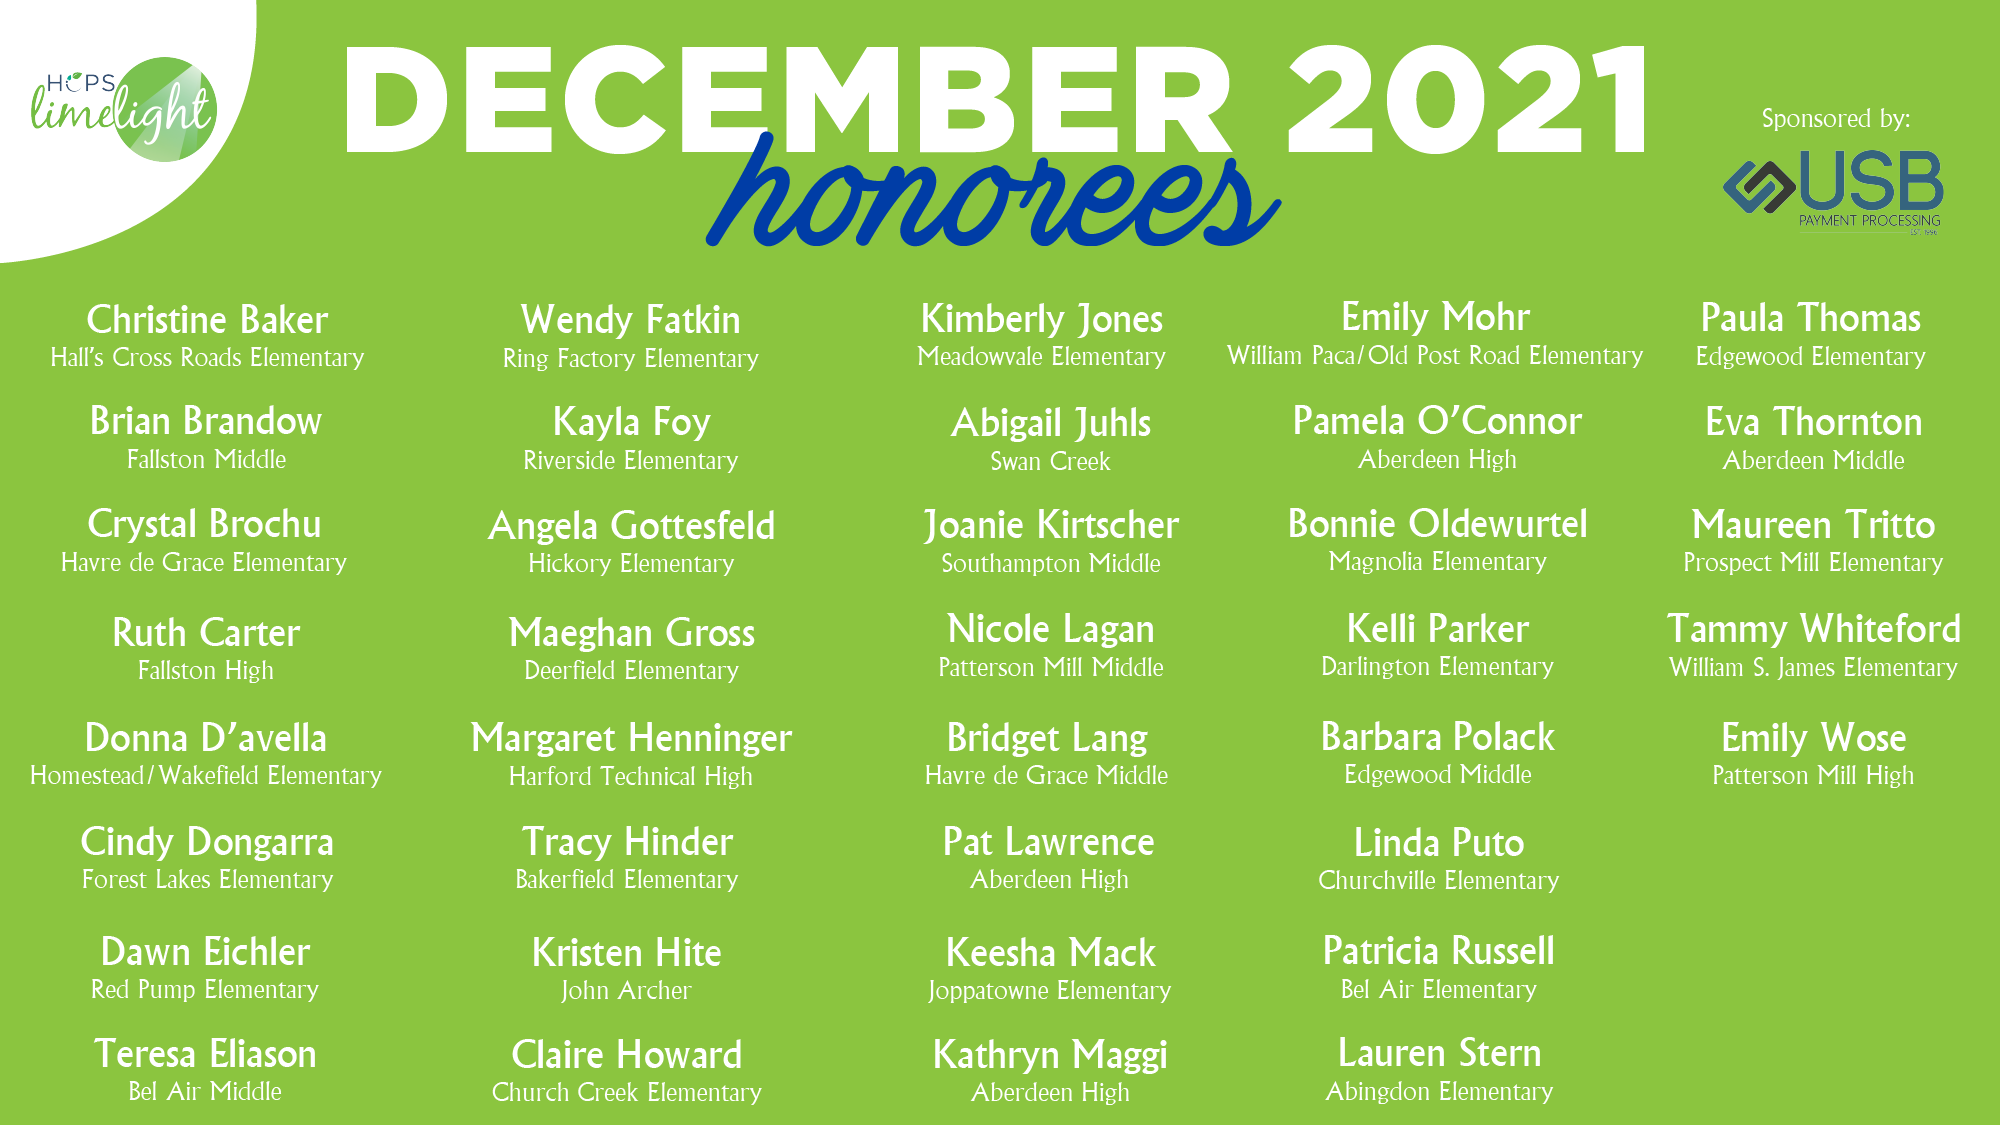 HCPS Limelight Honorees - Dec 2021